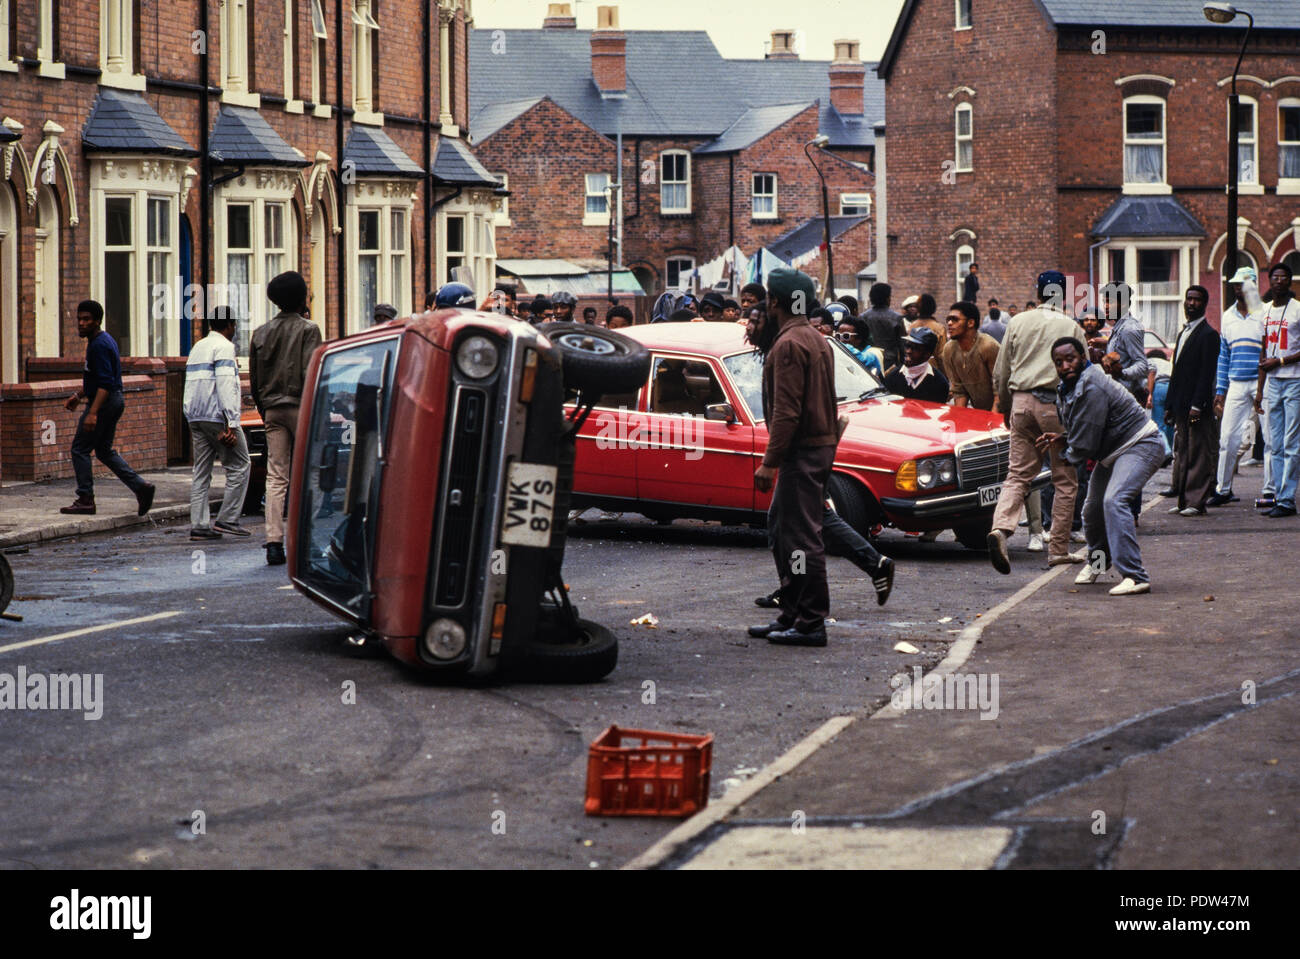 Handsworth Riots, Birmingham, Engalnd September 1985 The second Handsworth riots took place in the Handsworth district of Birmingham, West Midlands, from 9 to 11 September 1985. The riots were reportedly sparked by the arrest of a man near the Acapulco Cafe, Lozells and a police raid on the Villa Cross public house in the same area. Hundreds of people attacked police and property, looting and smashing, even setting off fire bombs.  Two brothers (Kassamali Moledina, 38, and his 44-year-old brother Amirali)[1] were burnt to death in the post office that they ran.[2] Two other people were unaccou Stock Photo